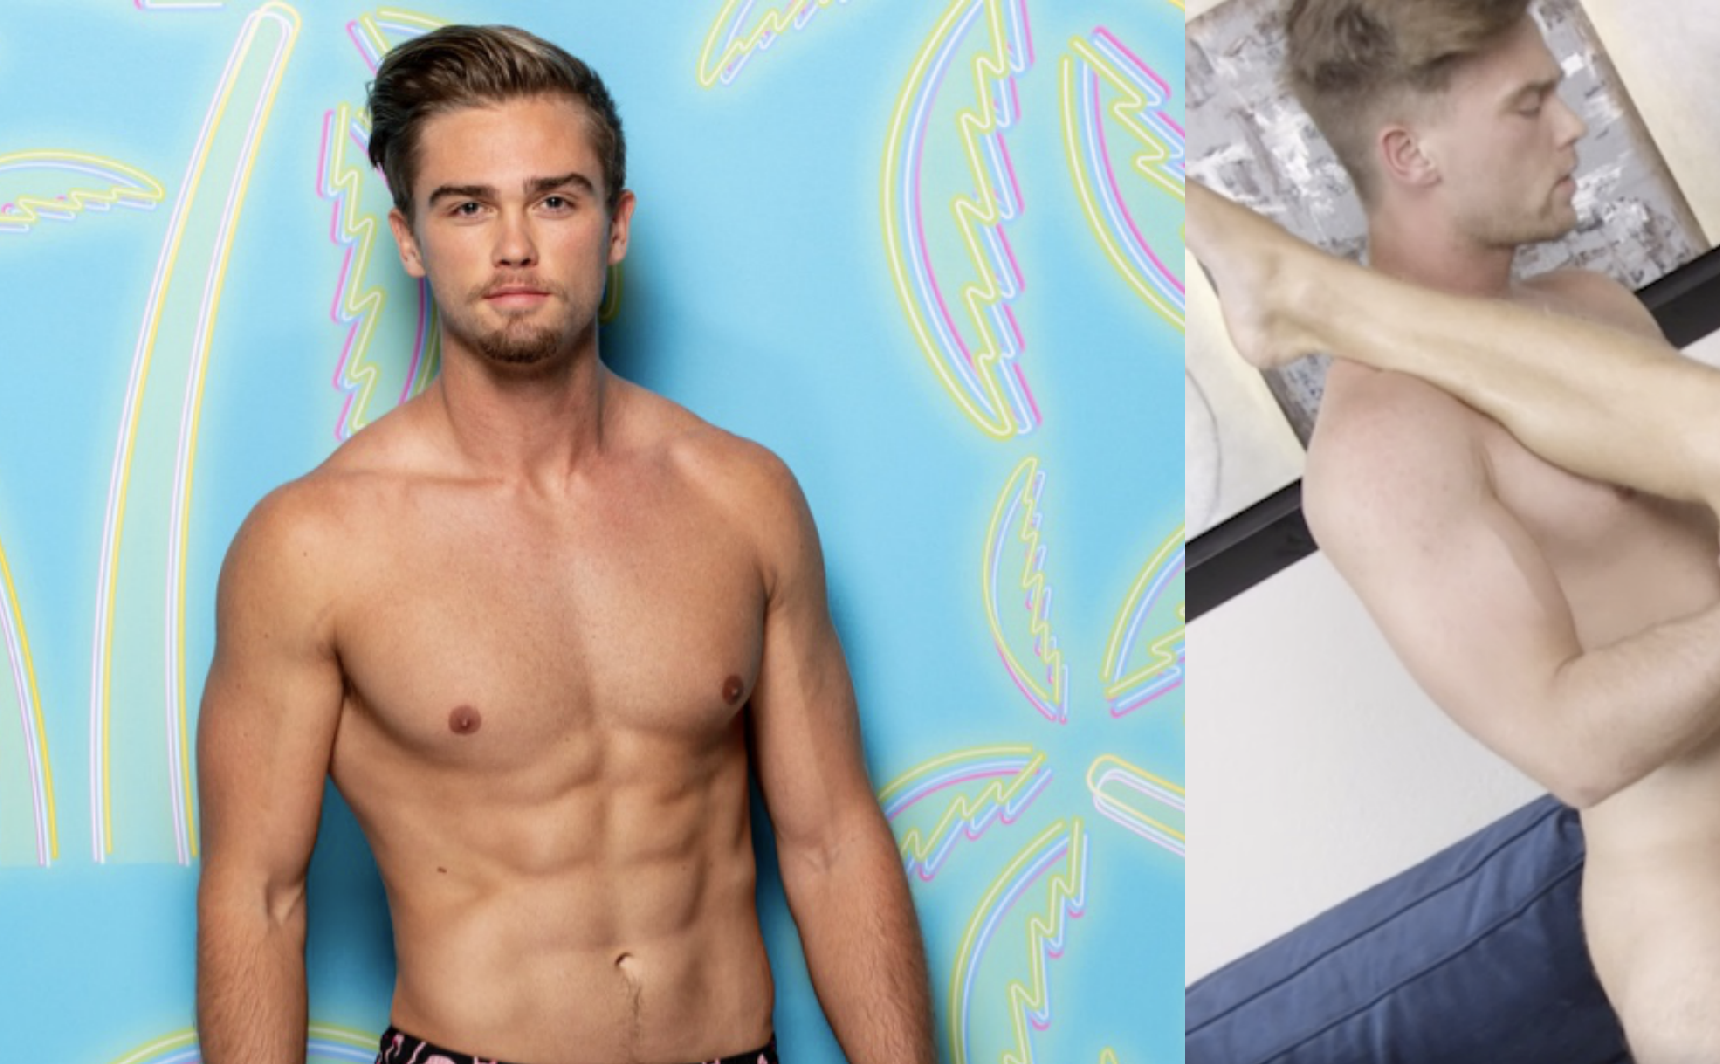 Homophobic 'Love Island' Remove Contestant After Discovering his Gay Porn  [NSFW] - Cocktails & Cocktalk